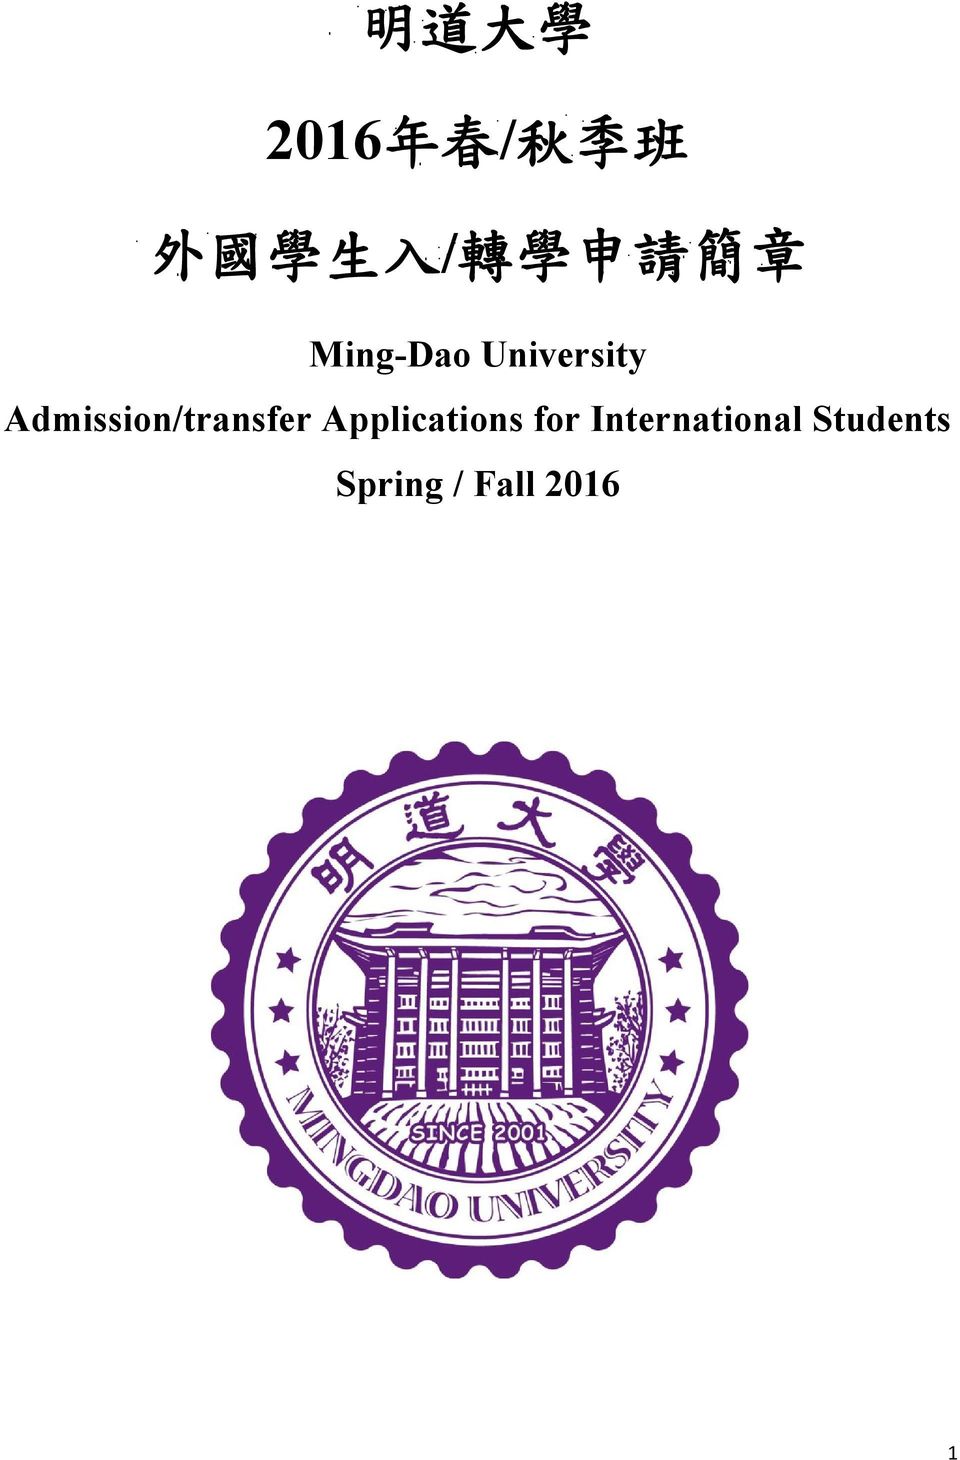 Admission/transfer Applications for